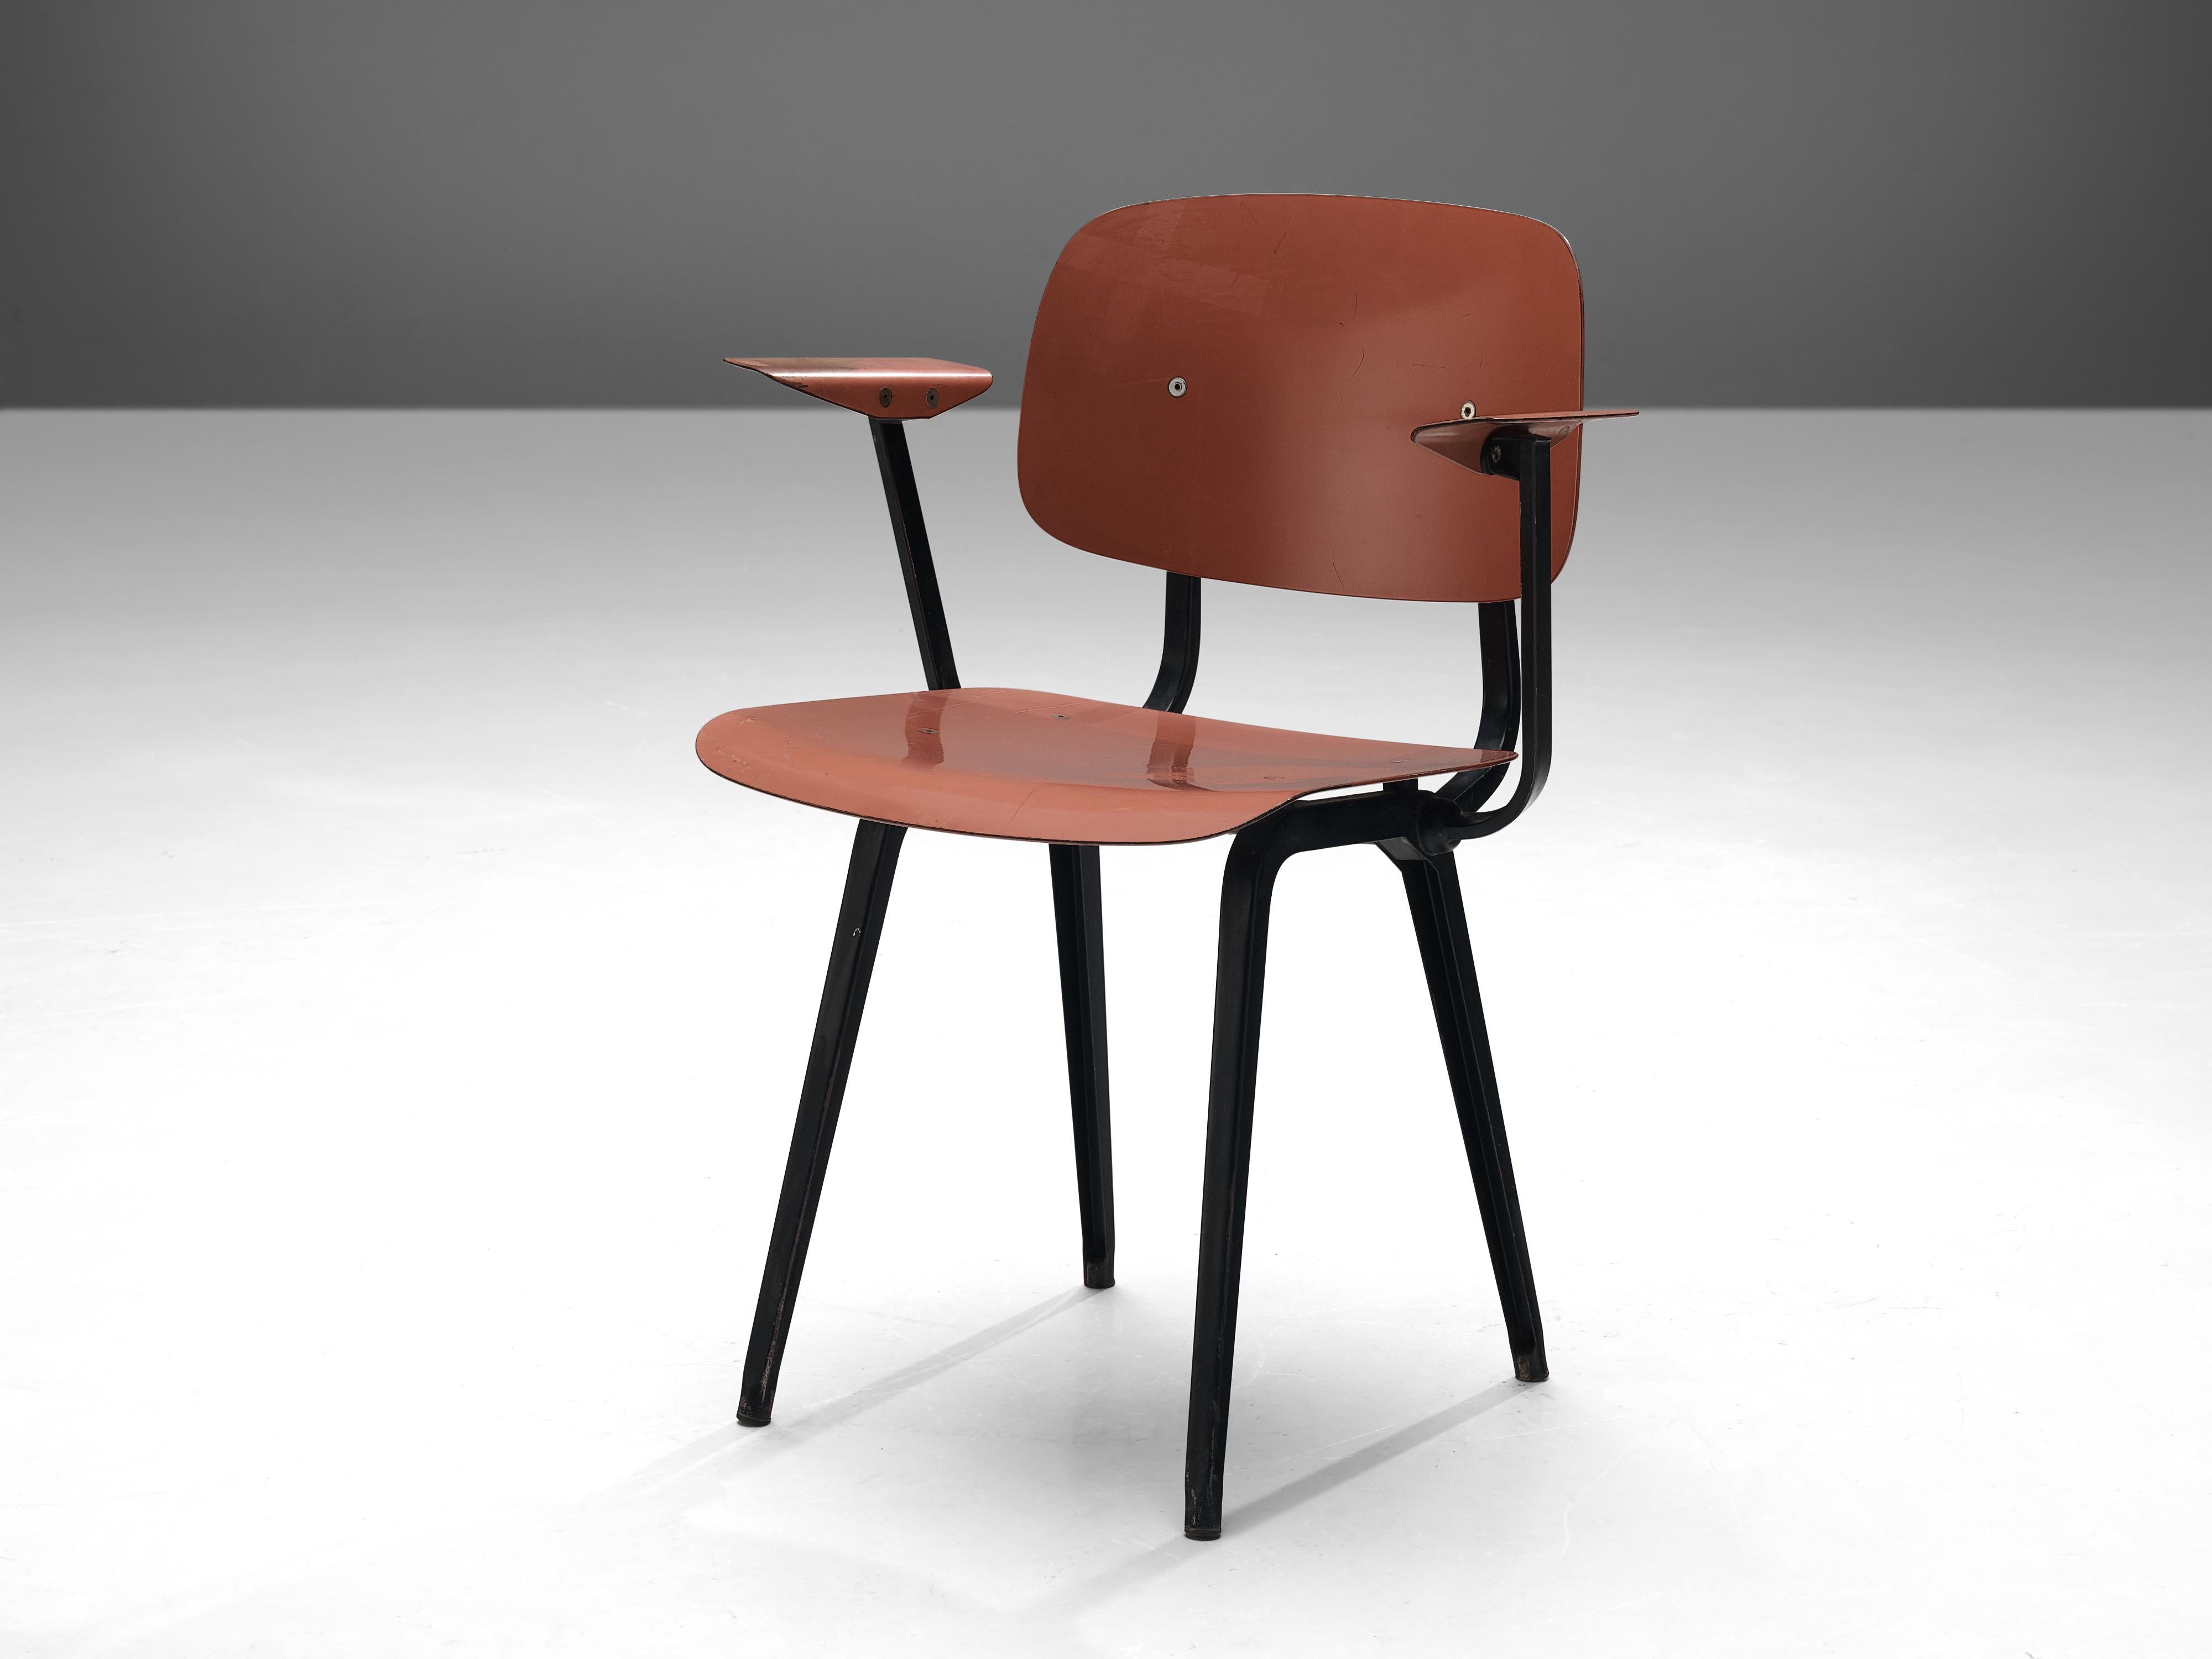 Friso Kramer for Cirkel Ahrend, chair, ciranol, metal, The Netherlands, design 1953

This chair named ‘Revolt’ is designed by the Dutch designer Friso Kramer (1922-2019) that received a ‘Signe D’or Prize’ at the Triennale in Milan. This design